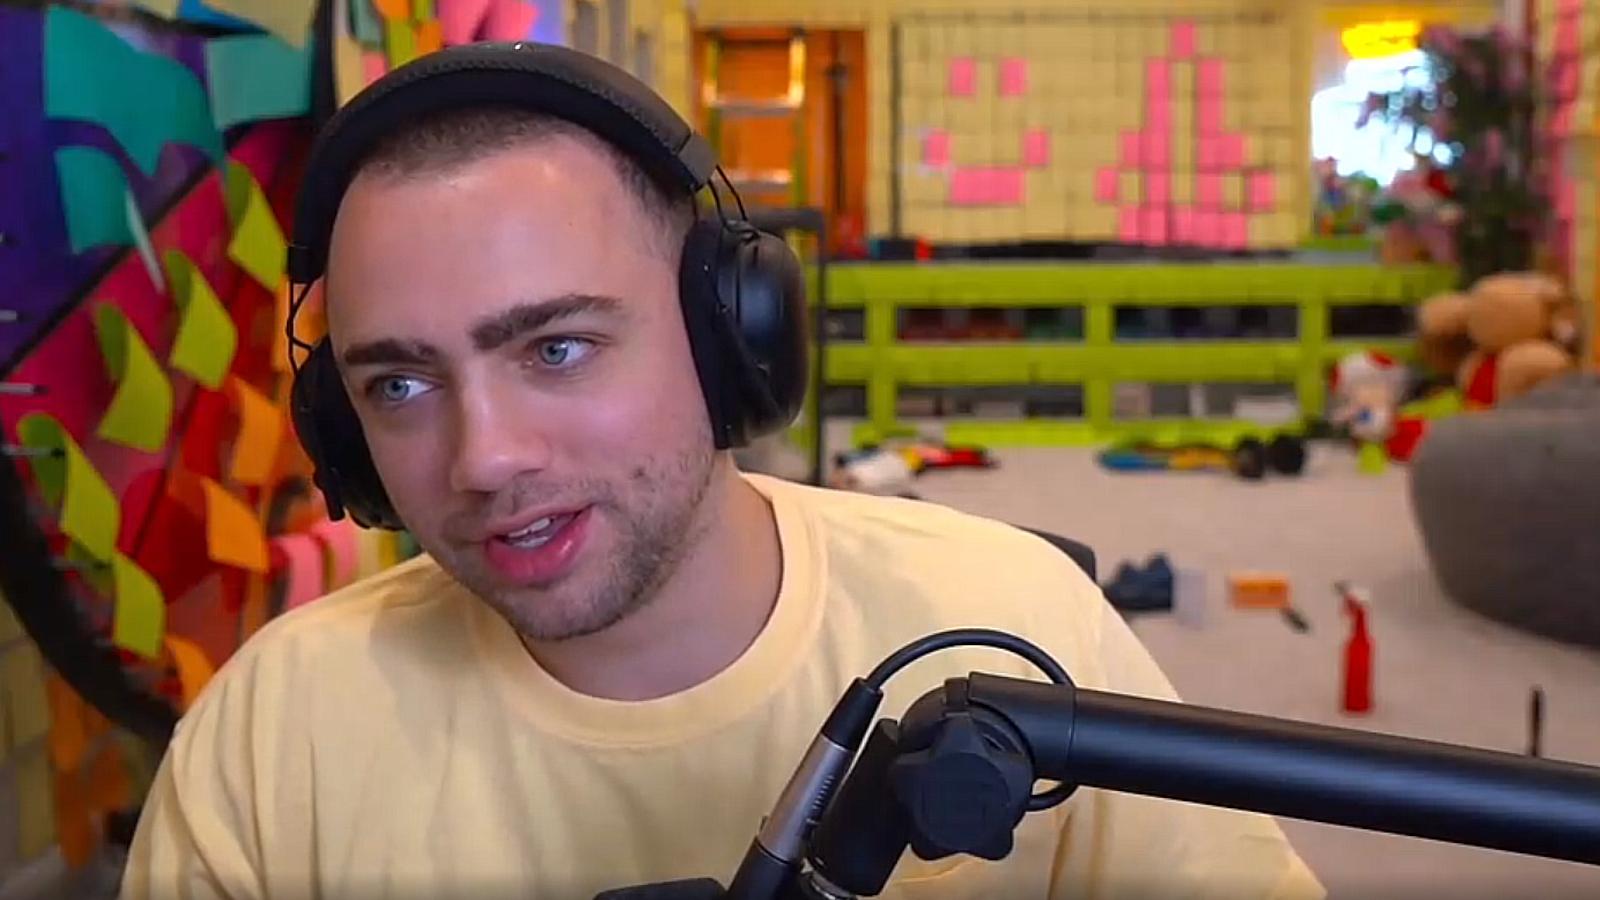 Mizkif in his room covered with sticky notes